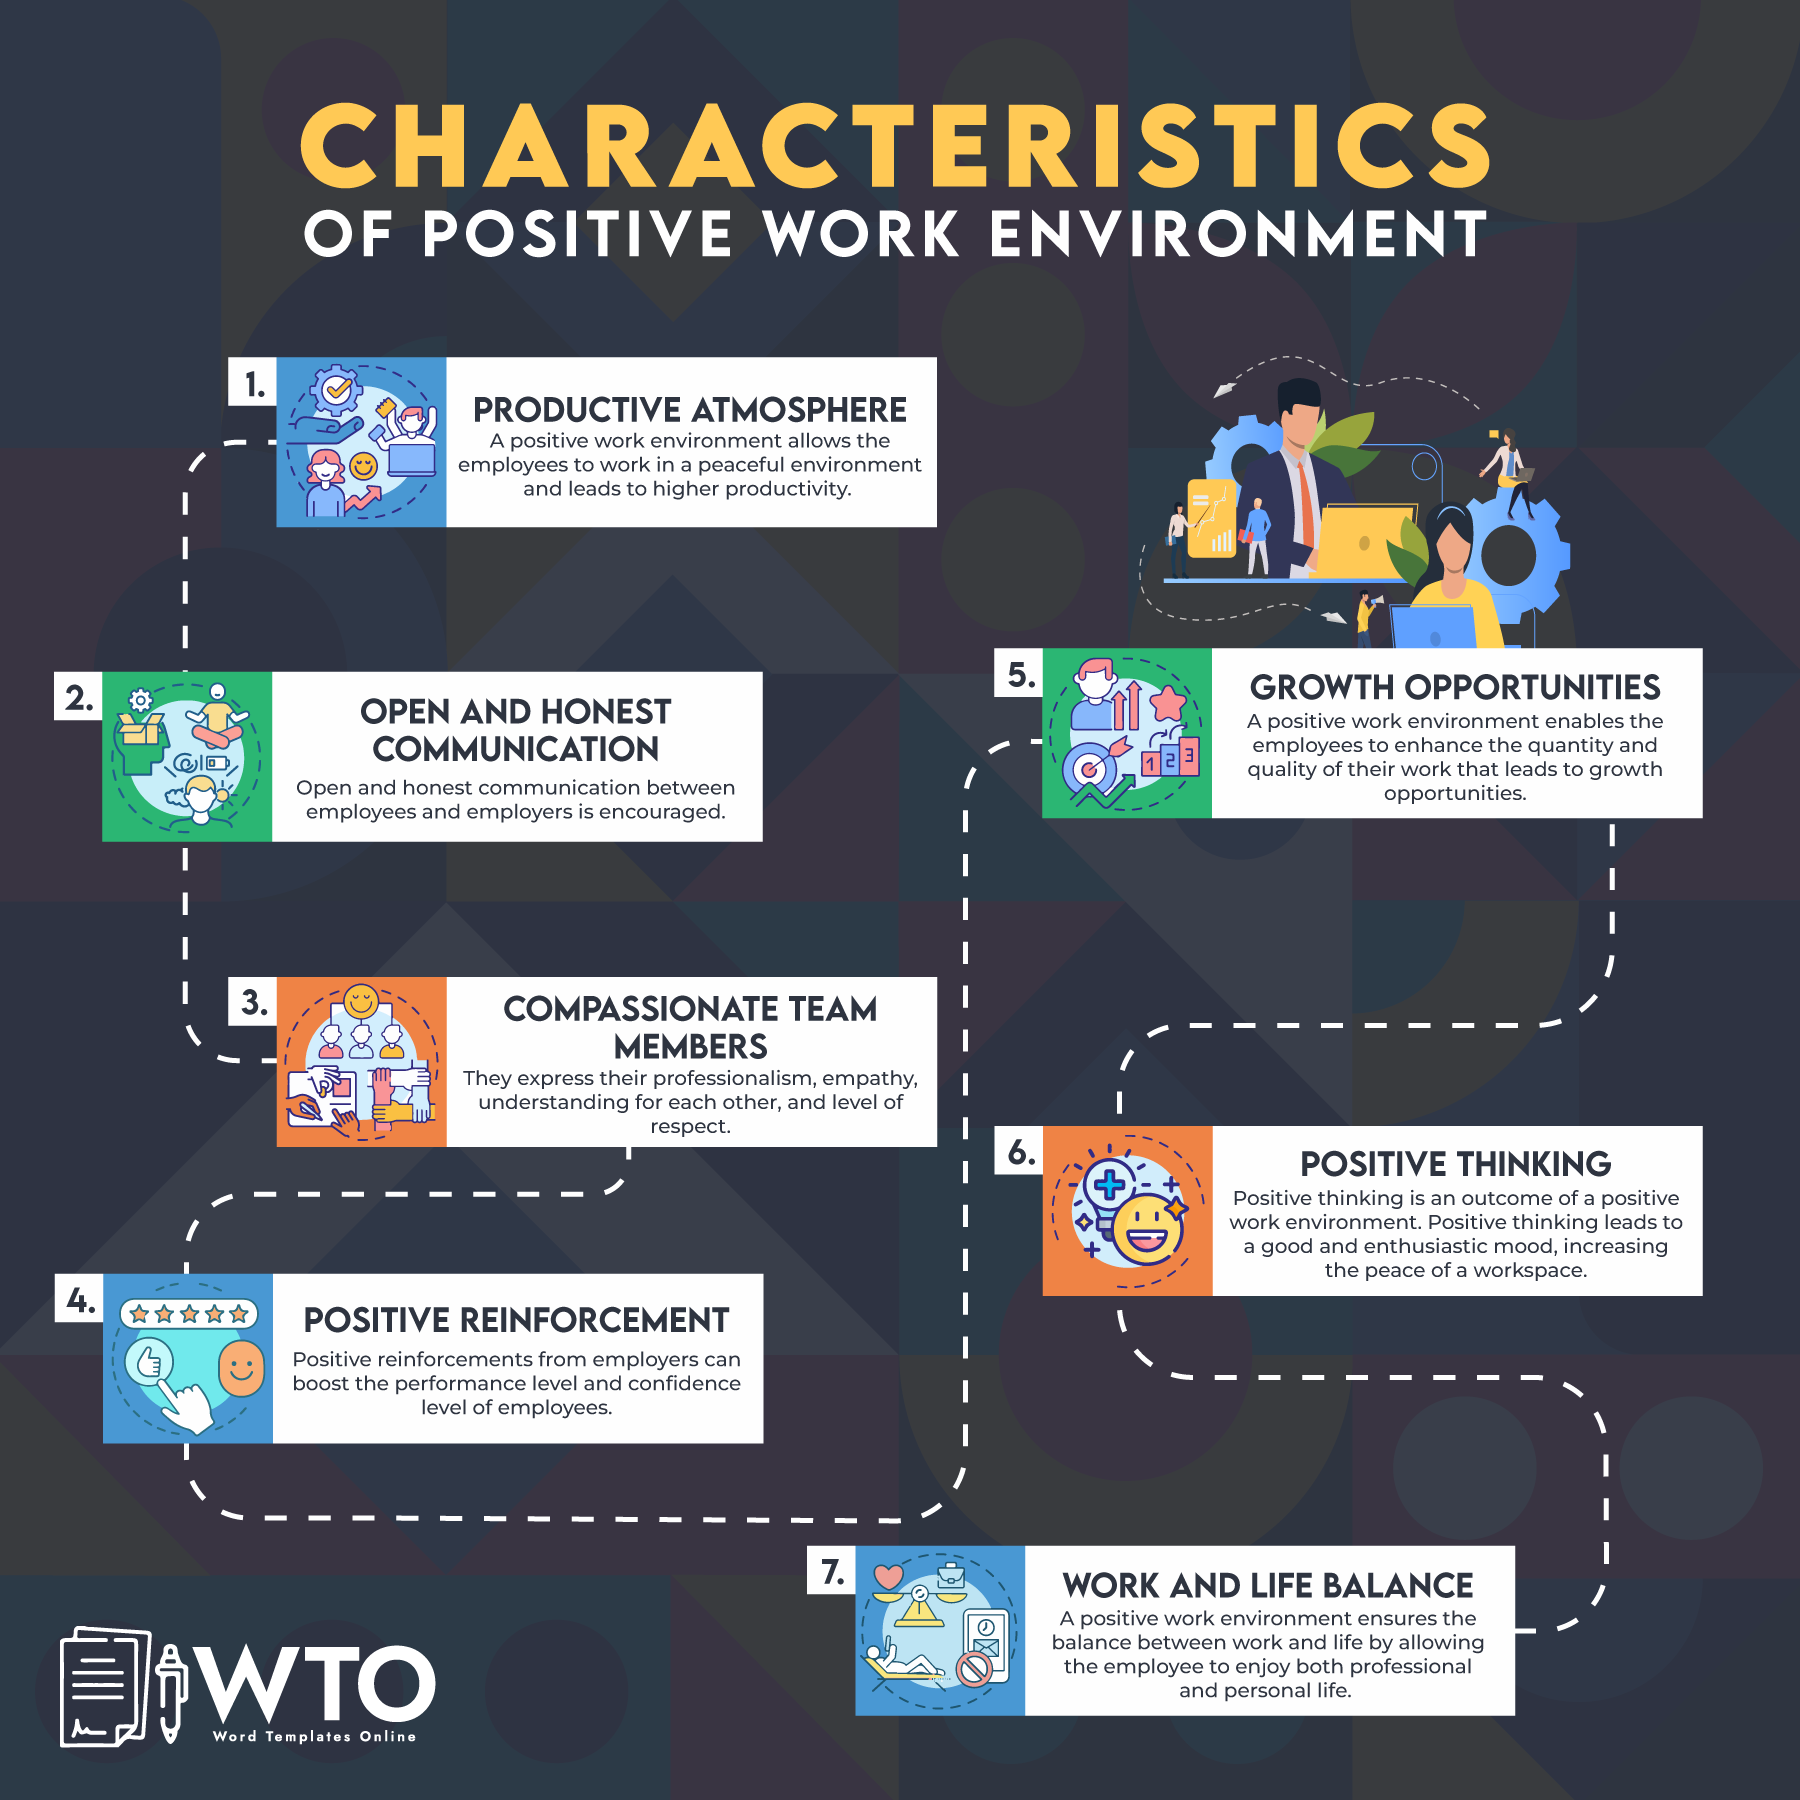 This infographic is about the characteristics of a positive work environment.